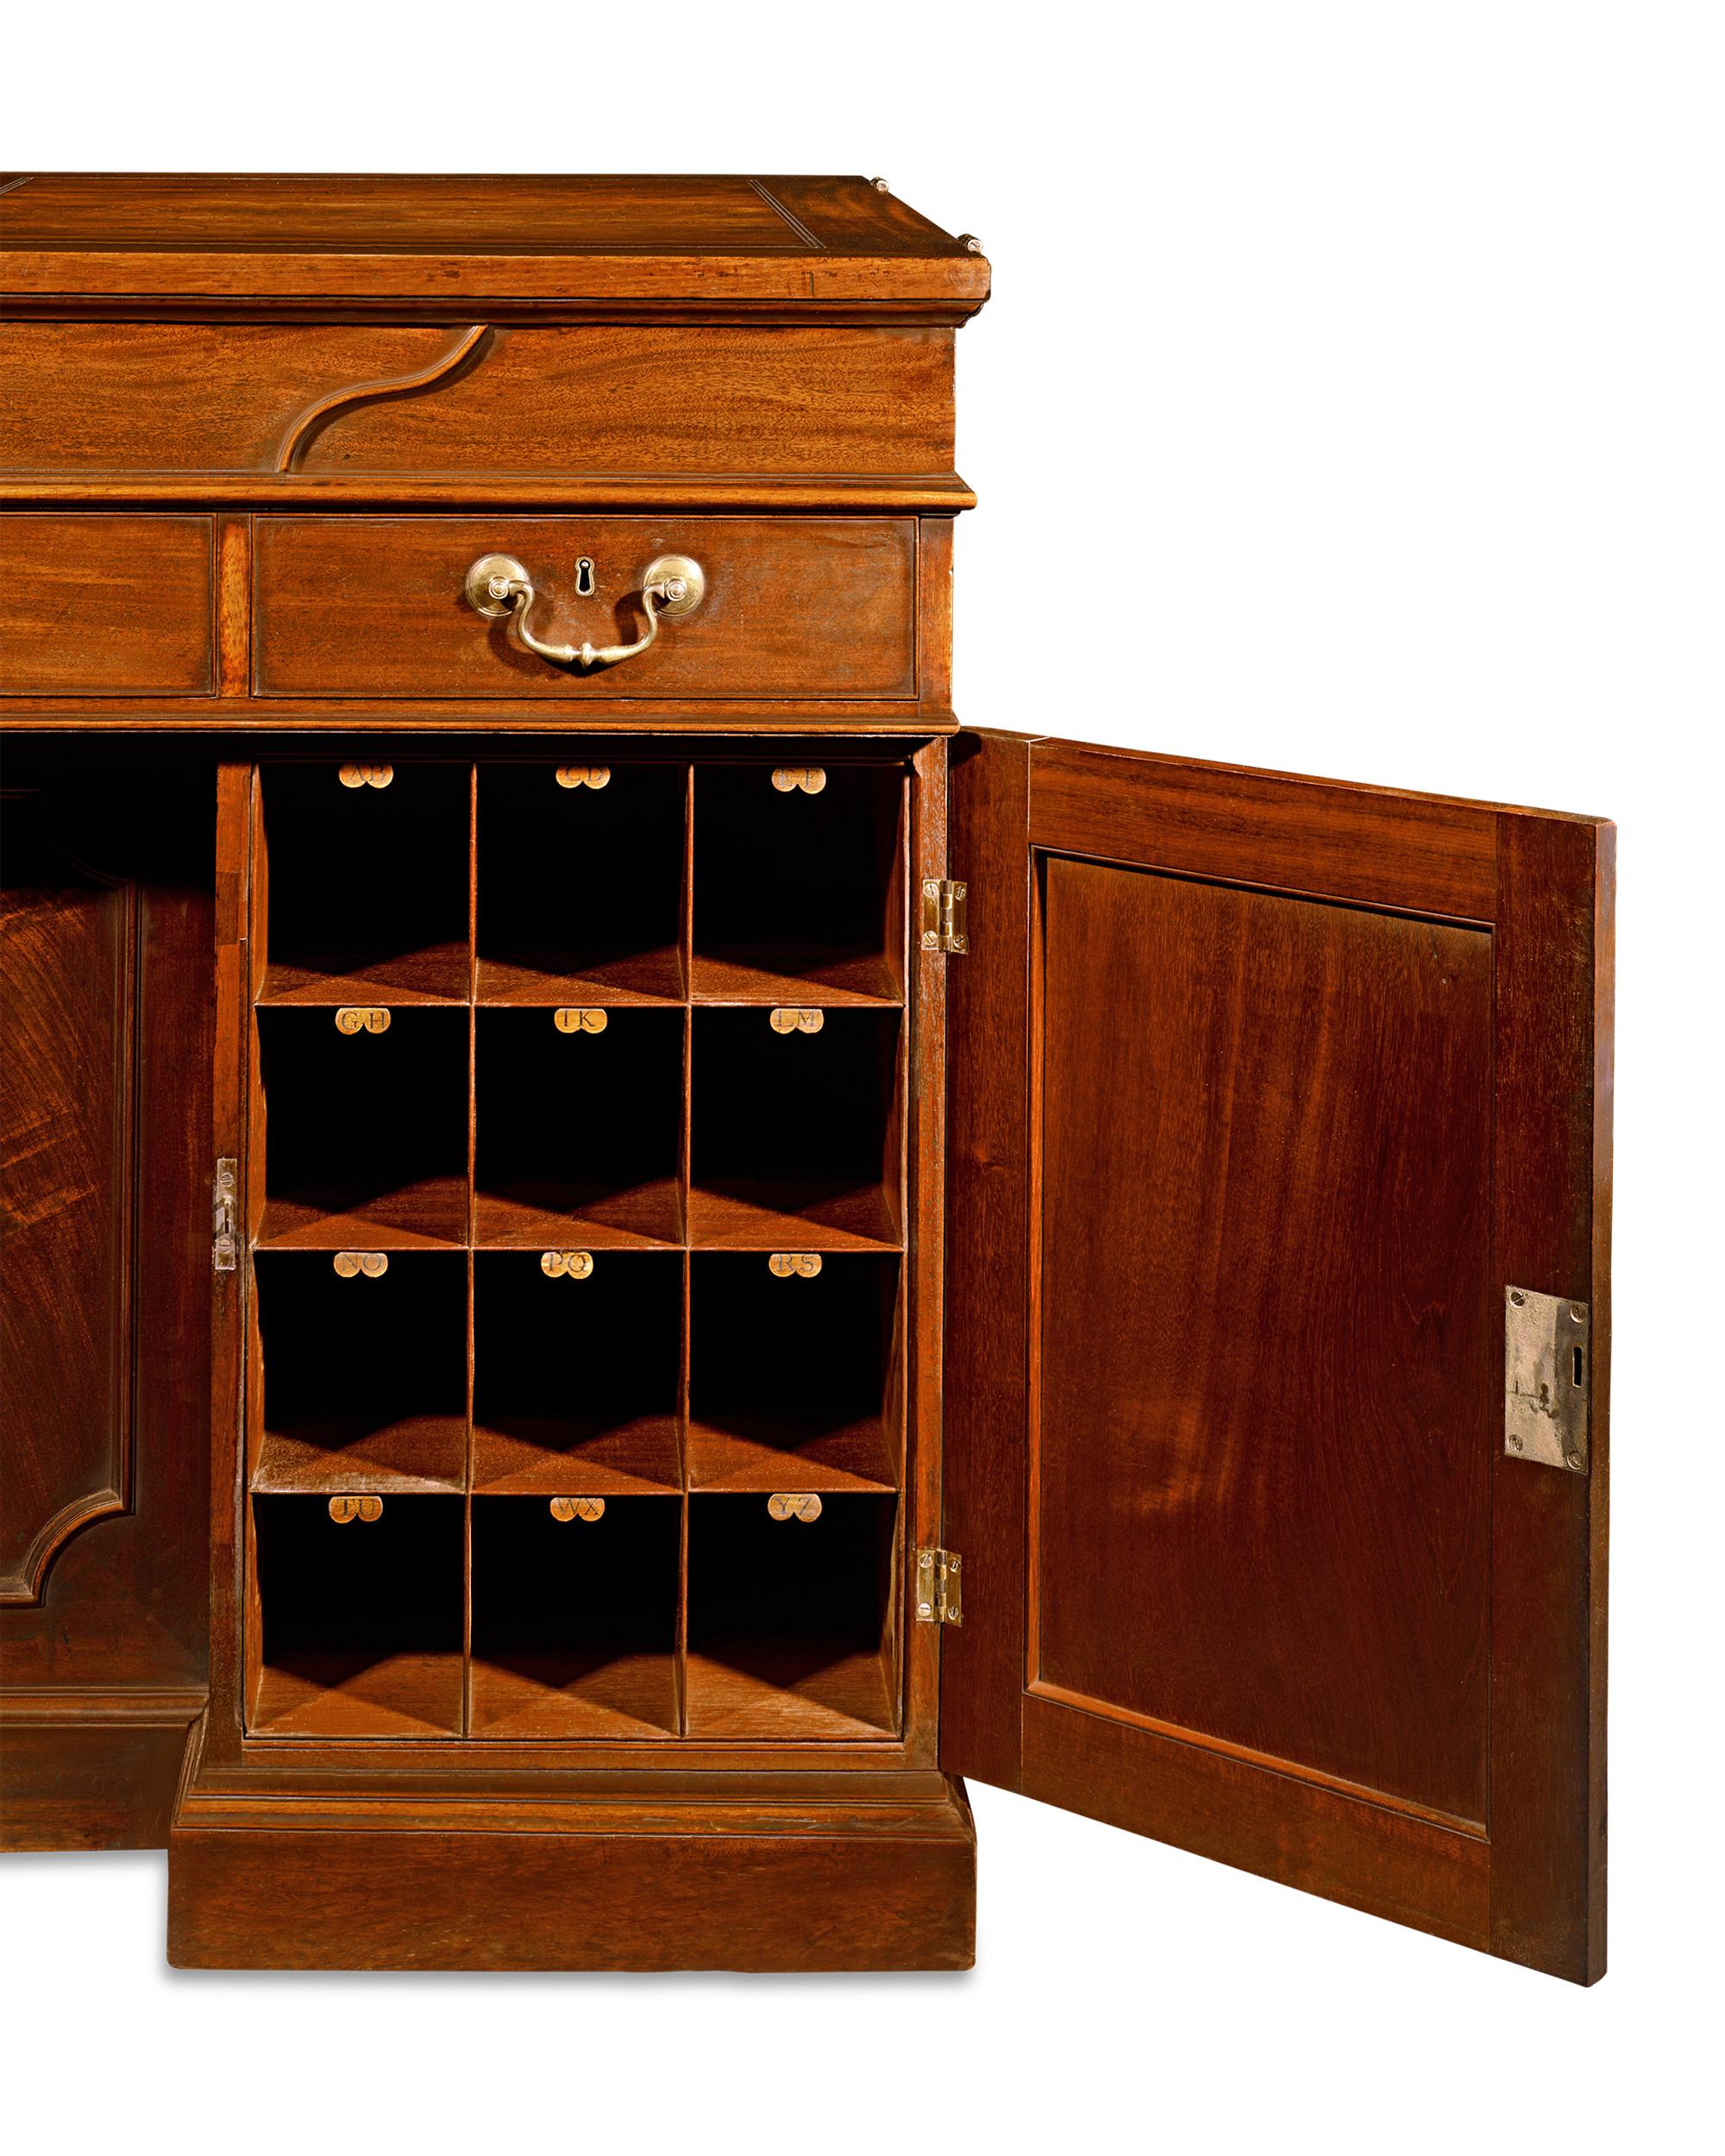 English Mahogany Desk by Thomas Chippendale For Sale